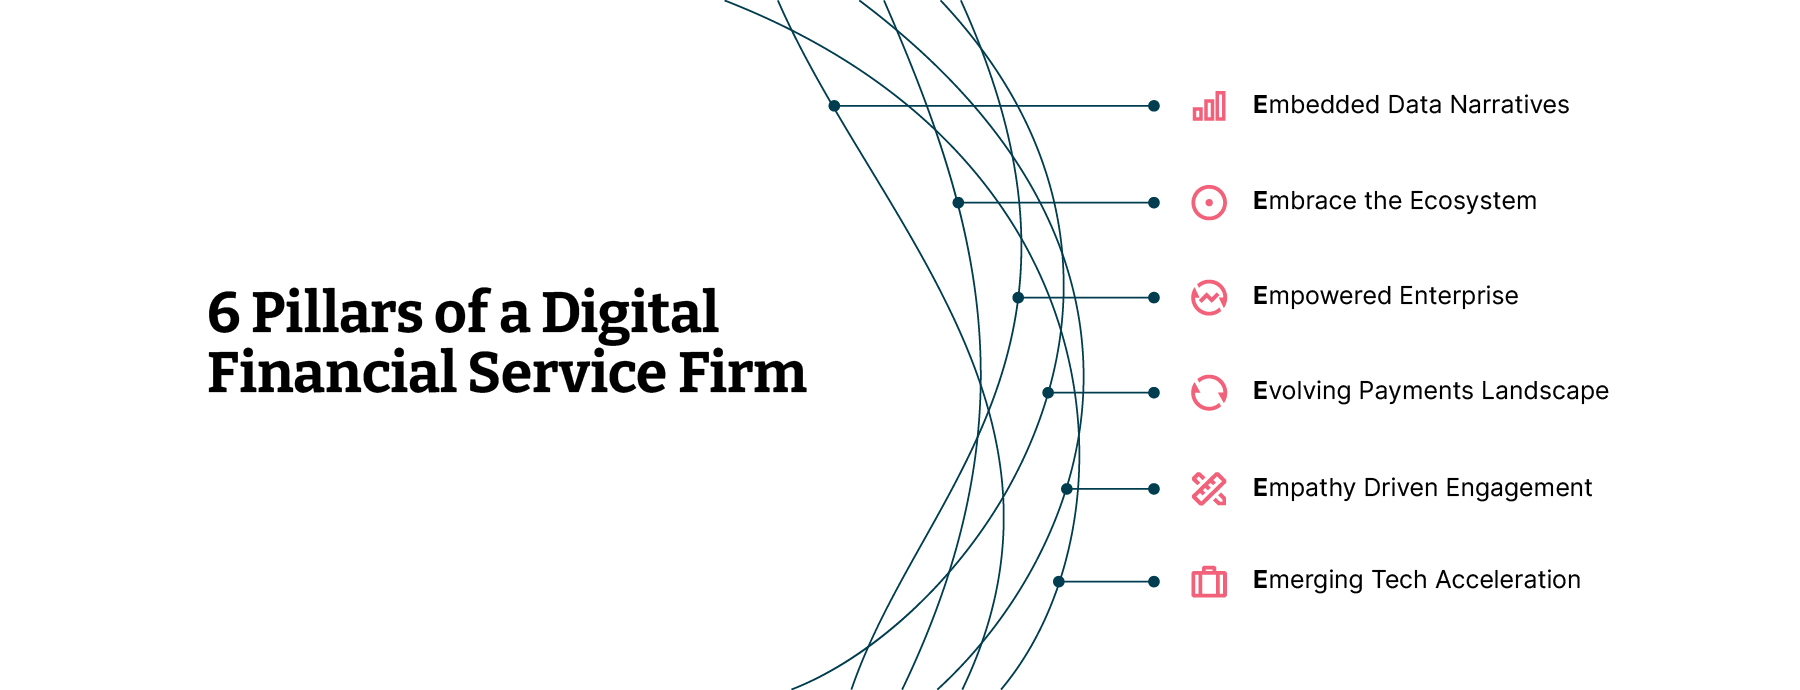 The Rise of the Digital Financial Services Firm